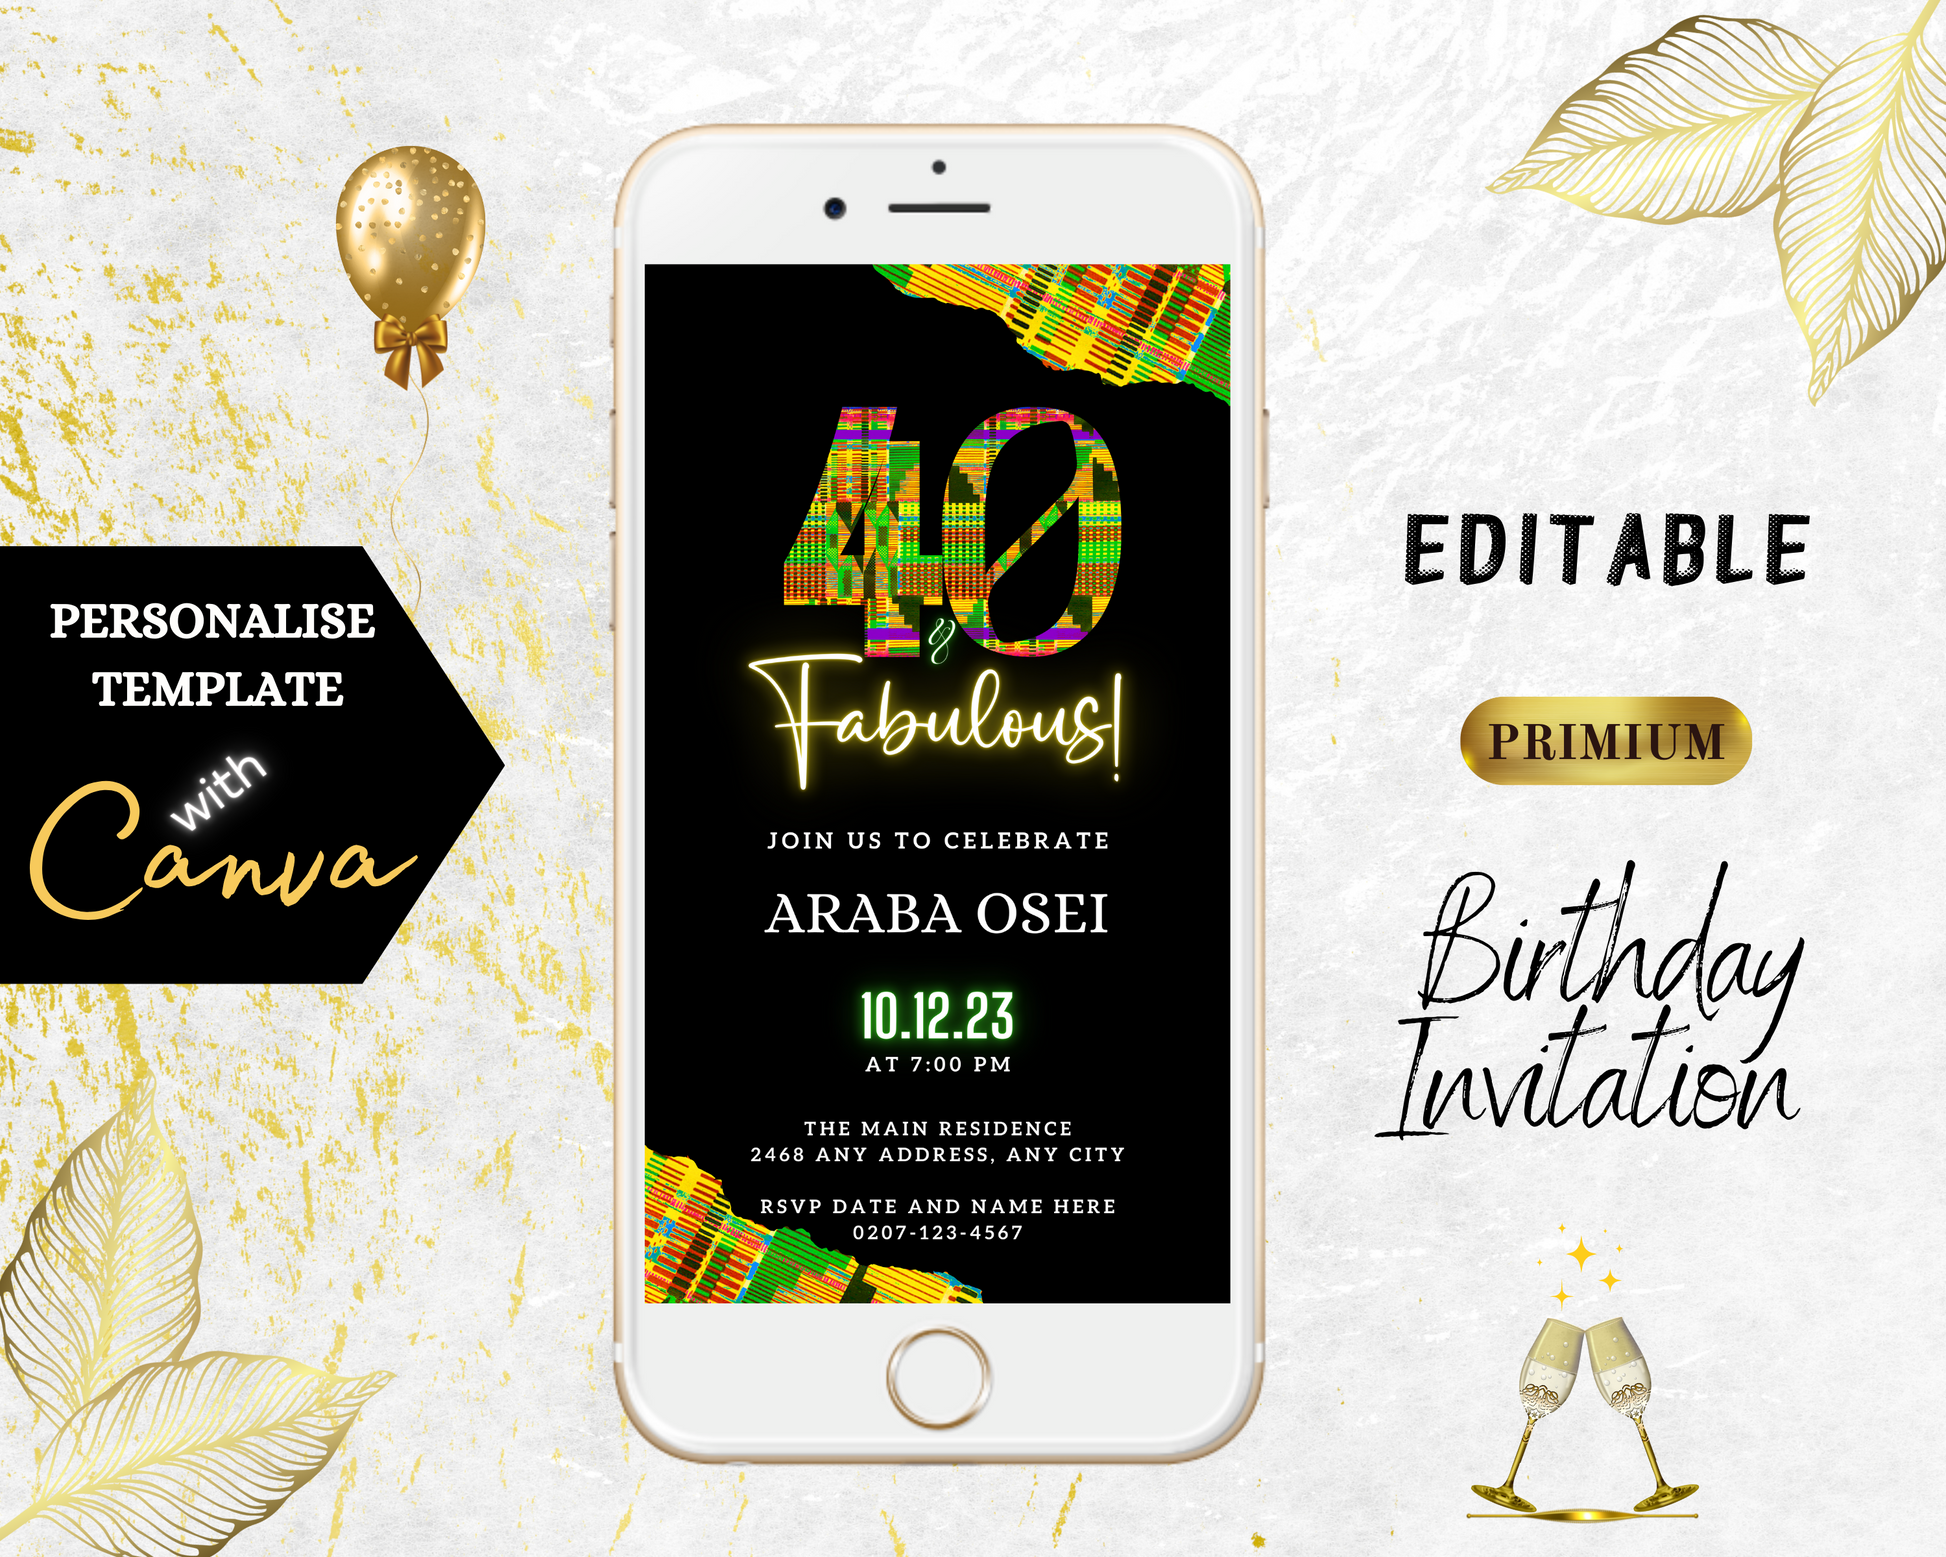 White cell phone displaying 40 & Fabulous digital invitation with gold balloons, editable via Canva for personal events, from URCordiallyInvited.